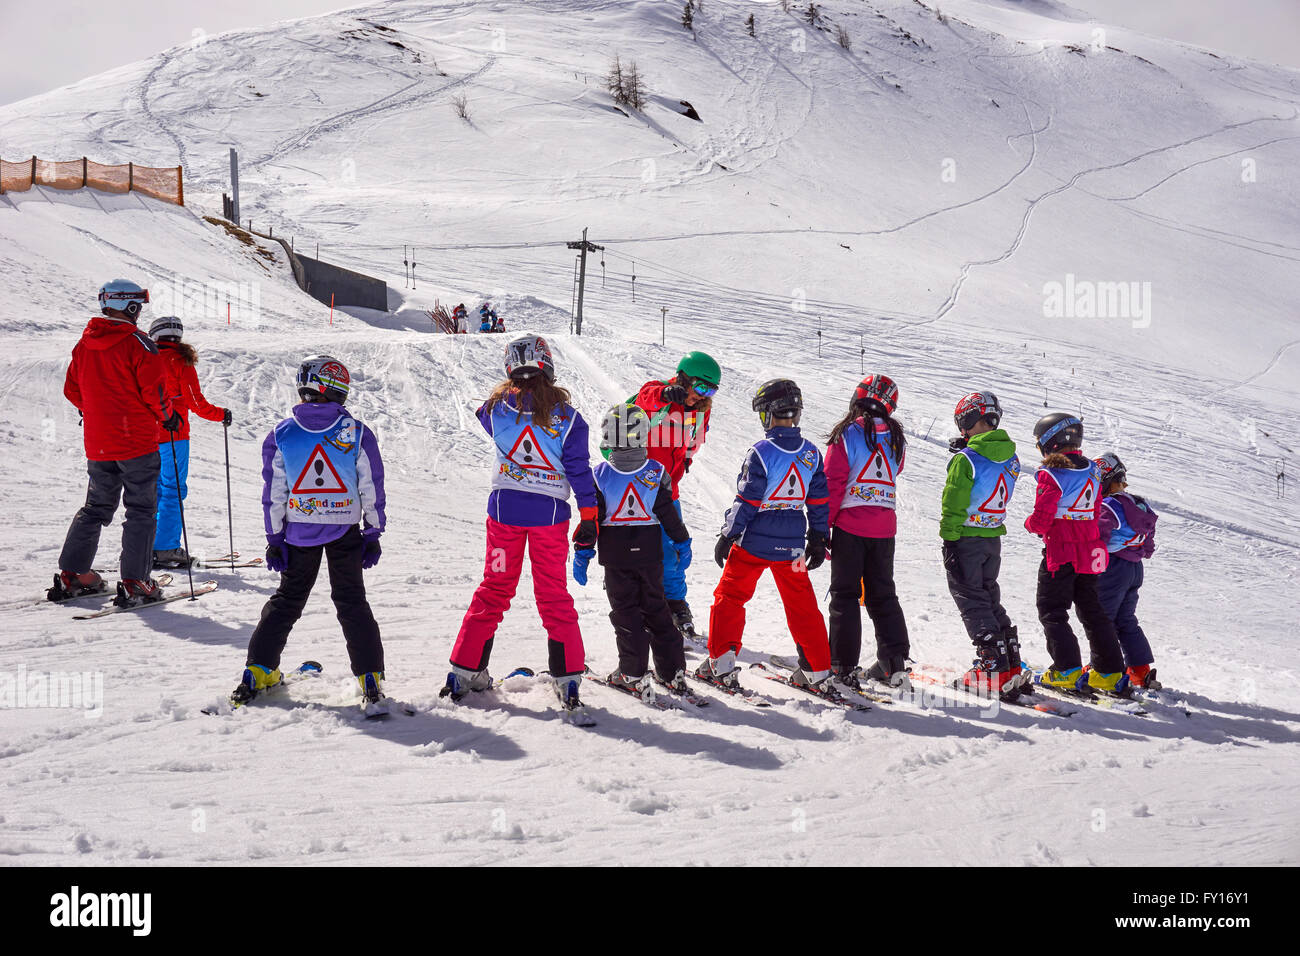 Children's ski school group with instructor. Picture is taken at ...